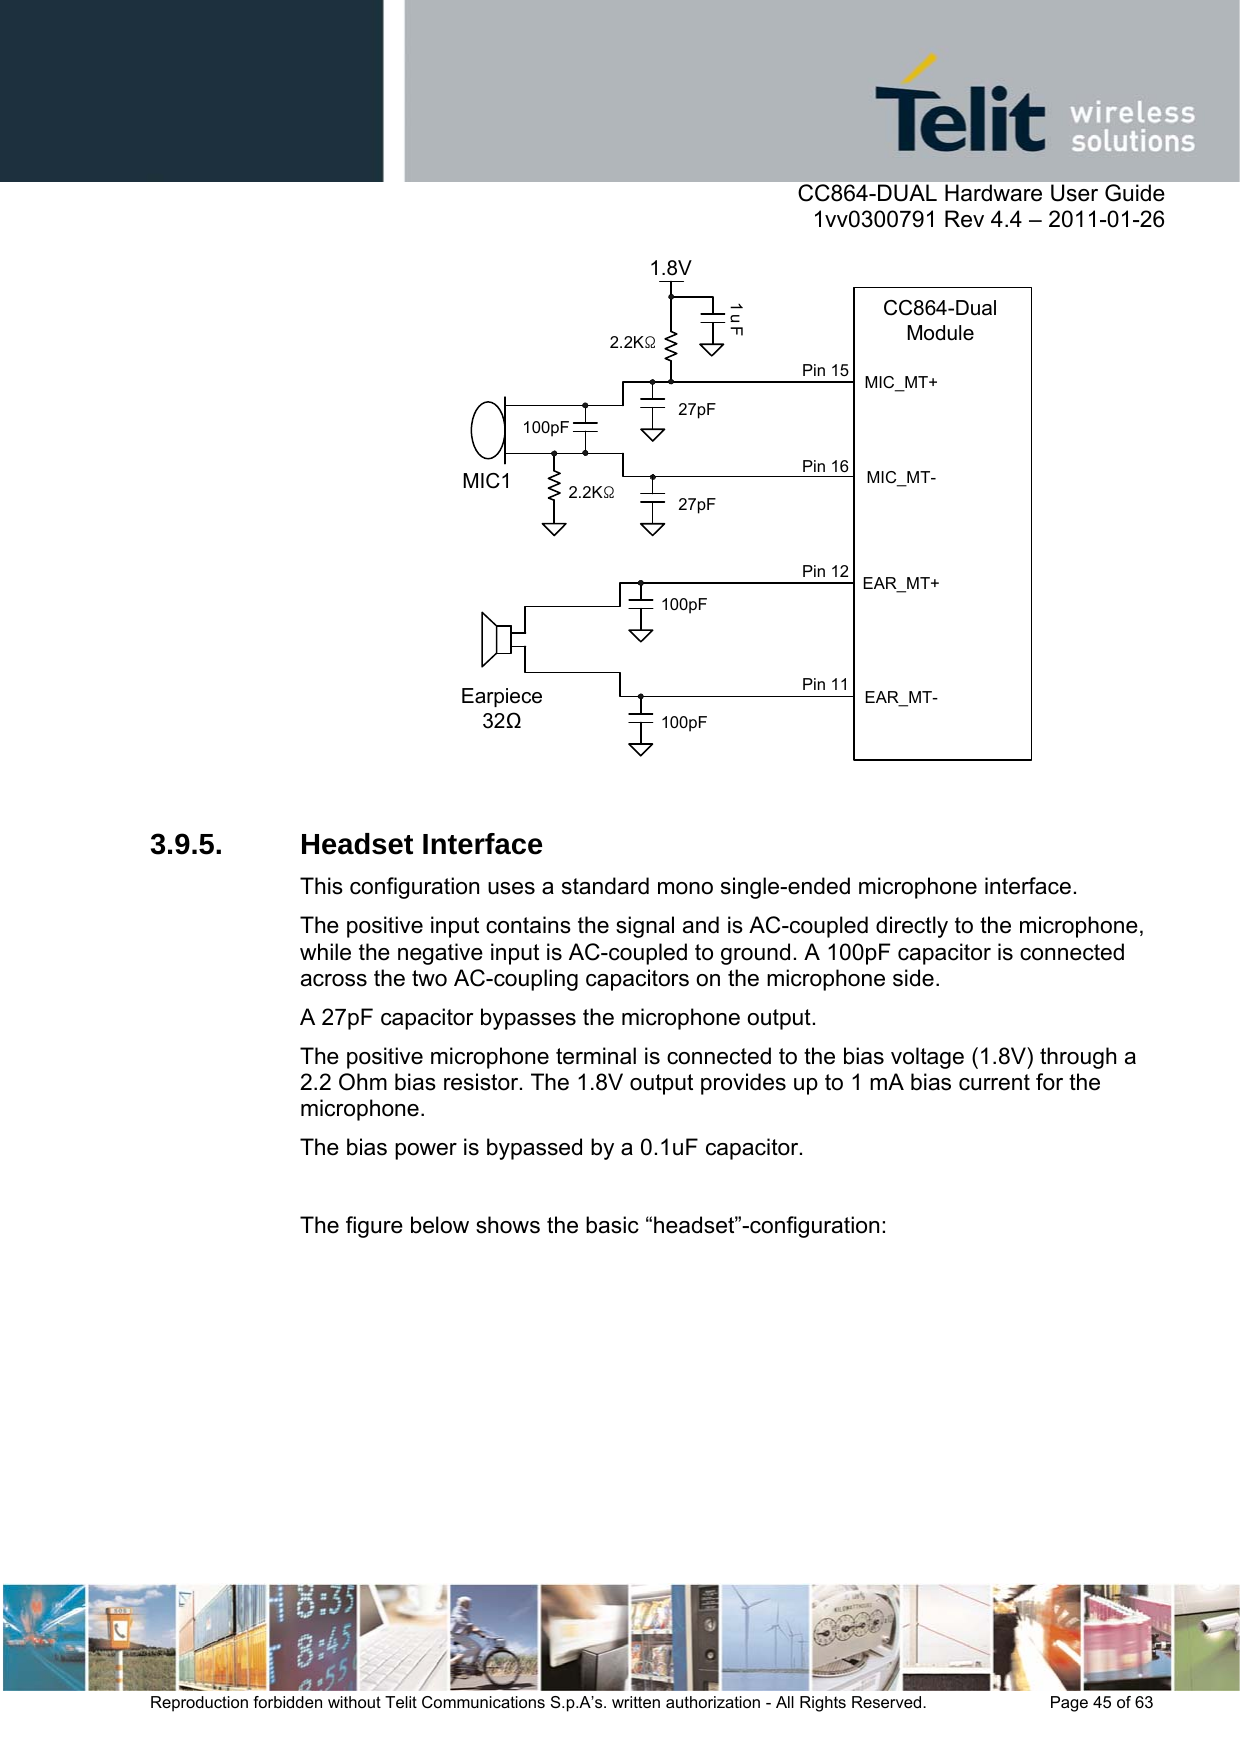      CC864-DUAL Hardware User Guide    1vv0300791 Rev 4.4 – 2011-01-26  Reproduction forbidden without Telit Communications S.p.A’s. written authorization - All Rights Reserved.    Page 45 of 63  MIC_MT-1.8V1uFEarpiece32100pF100pF100pFMIC127pF27pF2.2KΩ2.2KΩMIC_MT+EAR_MT-EAR_MT+CC864-Dual ModulePin 15Pin 16Pin 12Pin 11  3.9.5. Headset Interface This configuration uses a standard mono single-ended microphone interface.  The positive input contains the signal and is AC-coupled directly to the microphone, while the negative input is AC-coupled to ground. A 100pF capacitor is connected across the two AC-coupling capacitors on the microphone side.  A 27pF capacitor bypasses the microphone output. The positive microphone terminal is connected to the bias voltage (1.8V) through a 2.2 Ohm bias resistor. The 1.8V output provides up to 1 mA bias current for the microphone.  The bias power is bypassed by a 0.1uF capacitor.  The figure below shows the basic “headset”-configuration: 